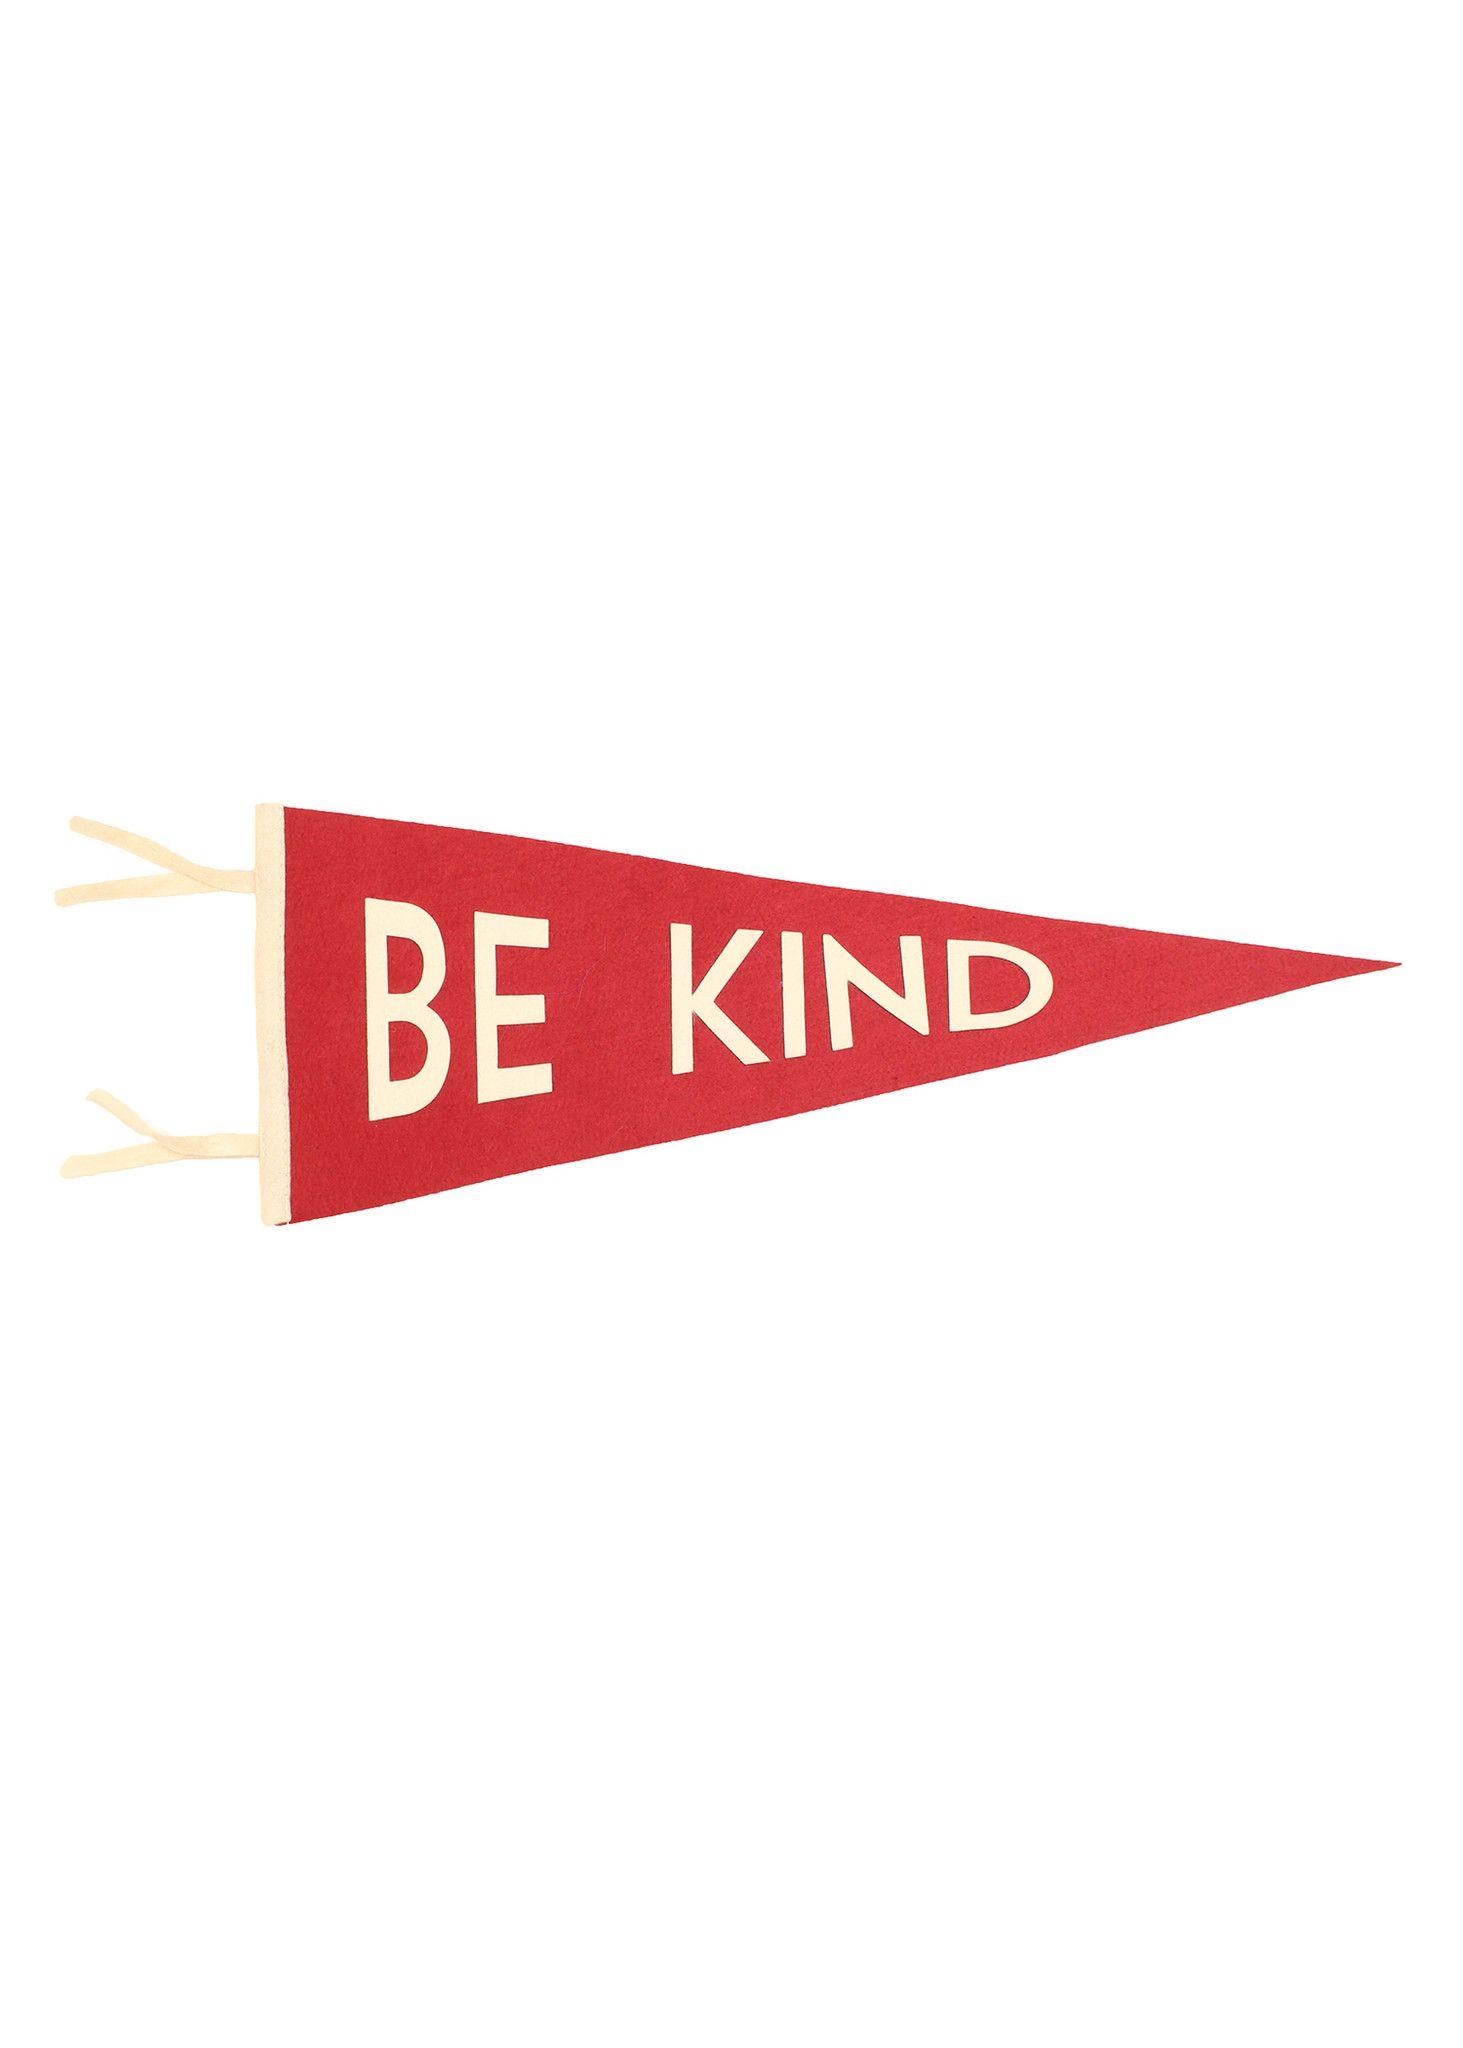 9 Red and White with Letters and Logo - Be Kind Pennant. Kindness, Charity, Giving. Red